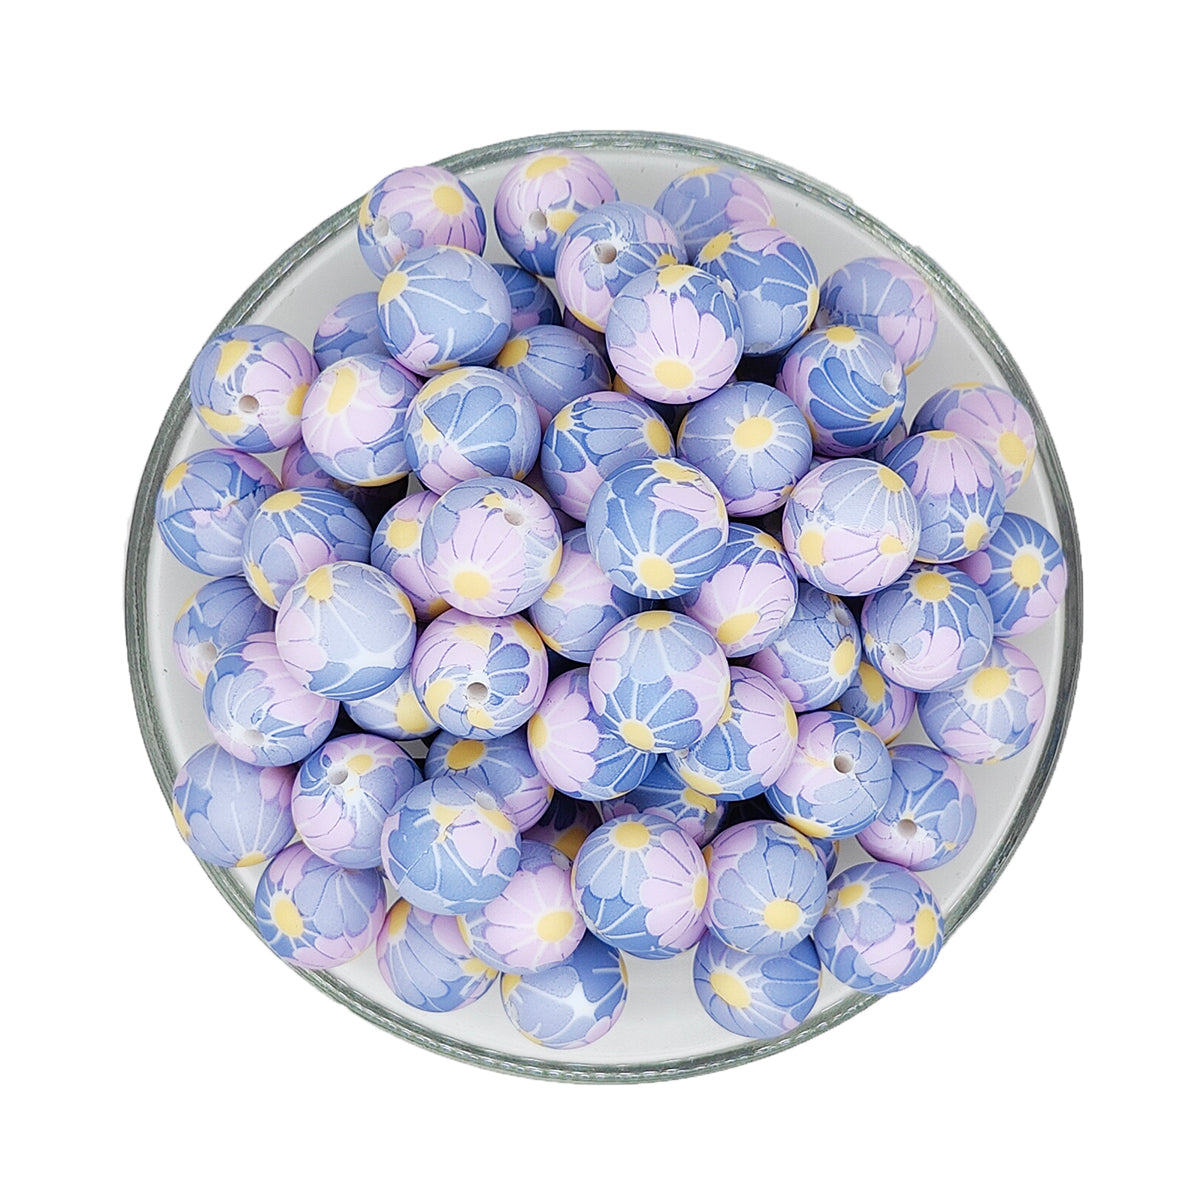 15mm Purple Floral Ball Print Round Silicone Beads